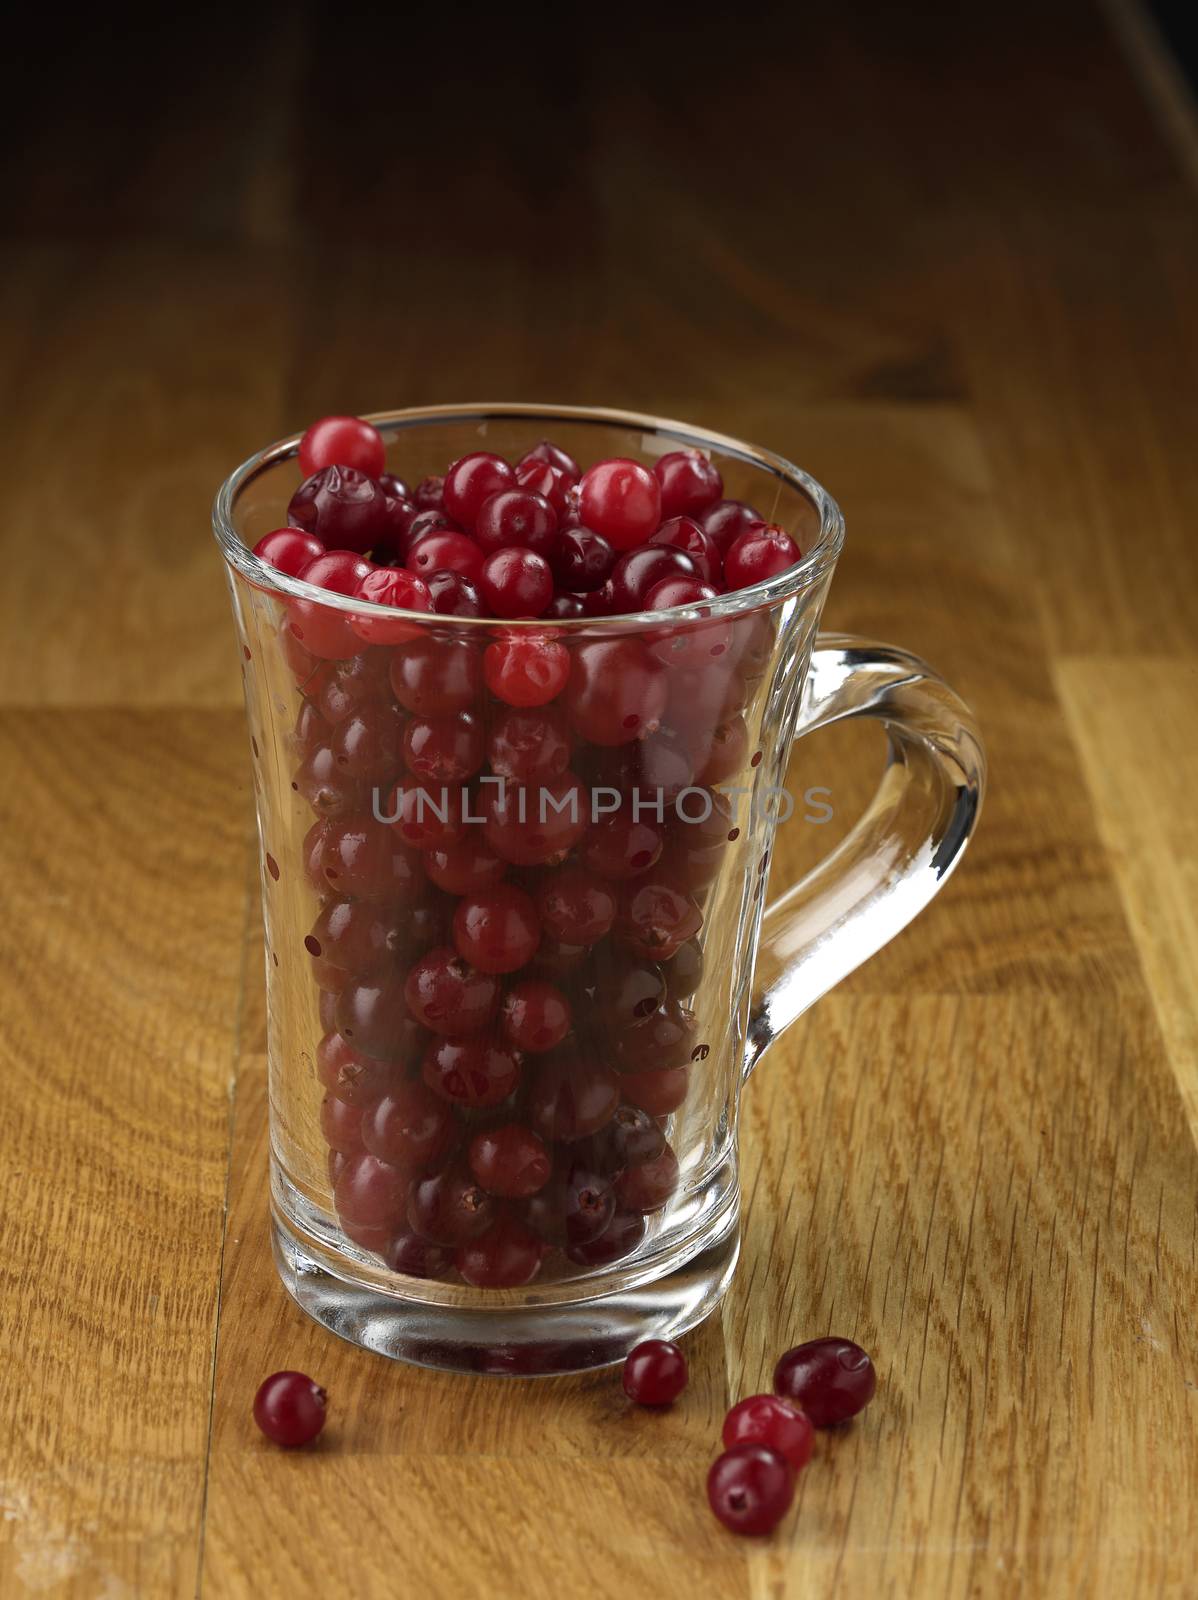 Cranberry glassy cup on the wooden table
